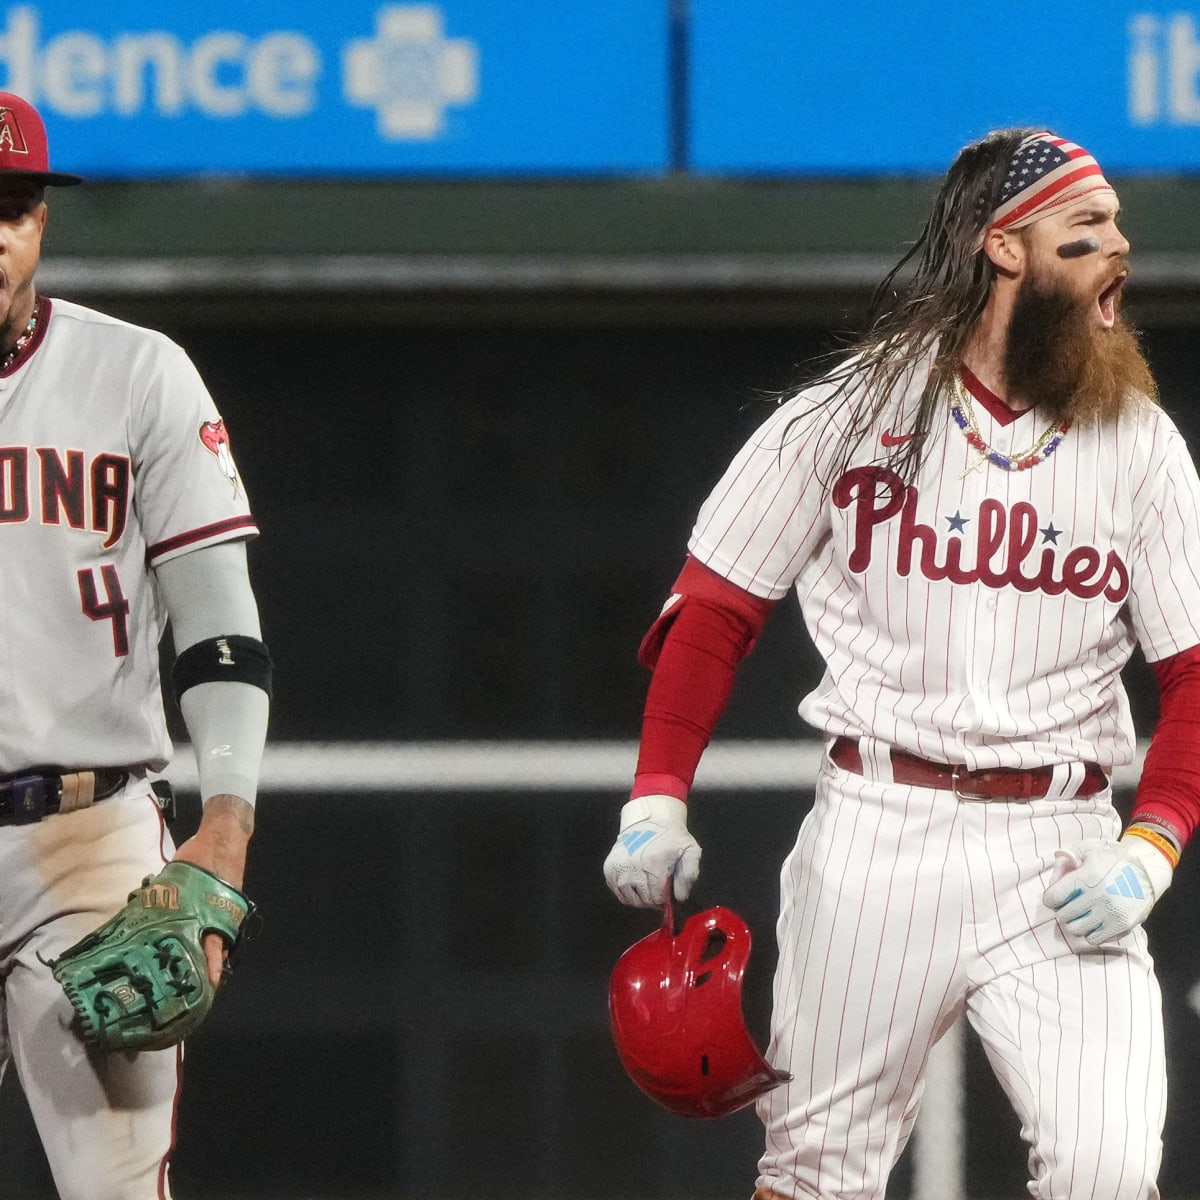 Phillies-Diamondbacks: Everything you need to know about NLCS Game 2